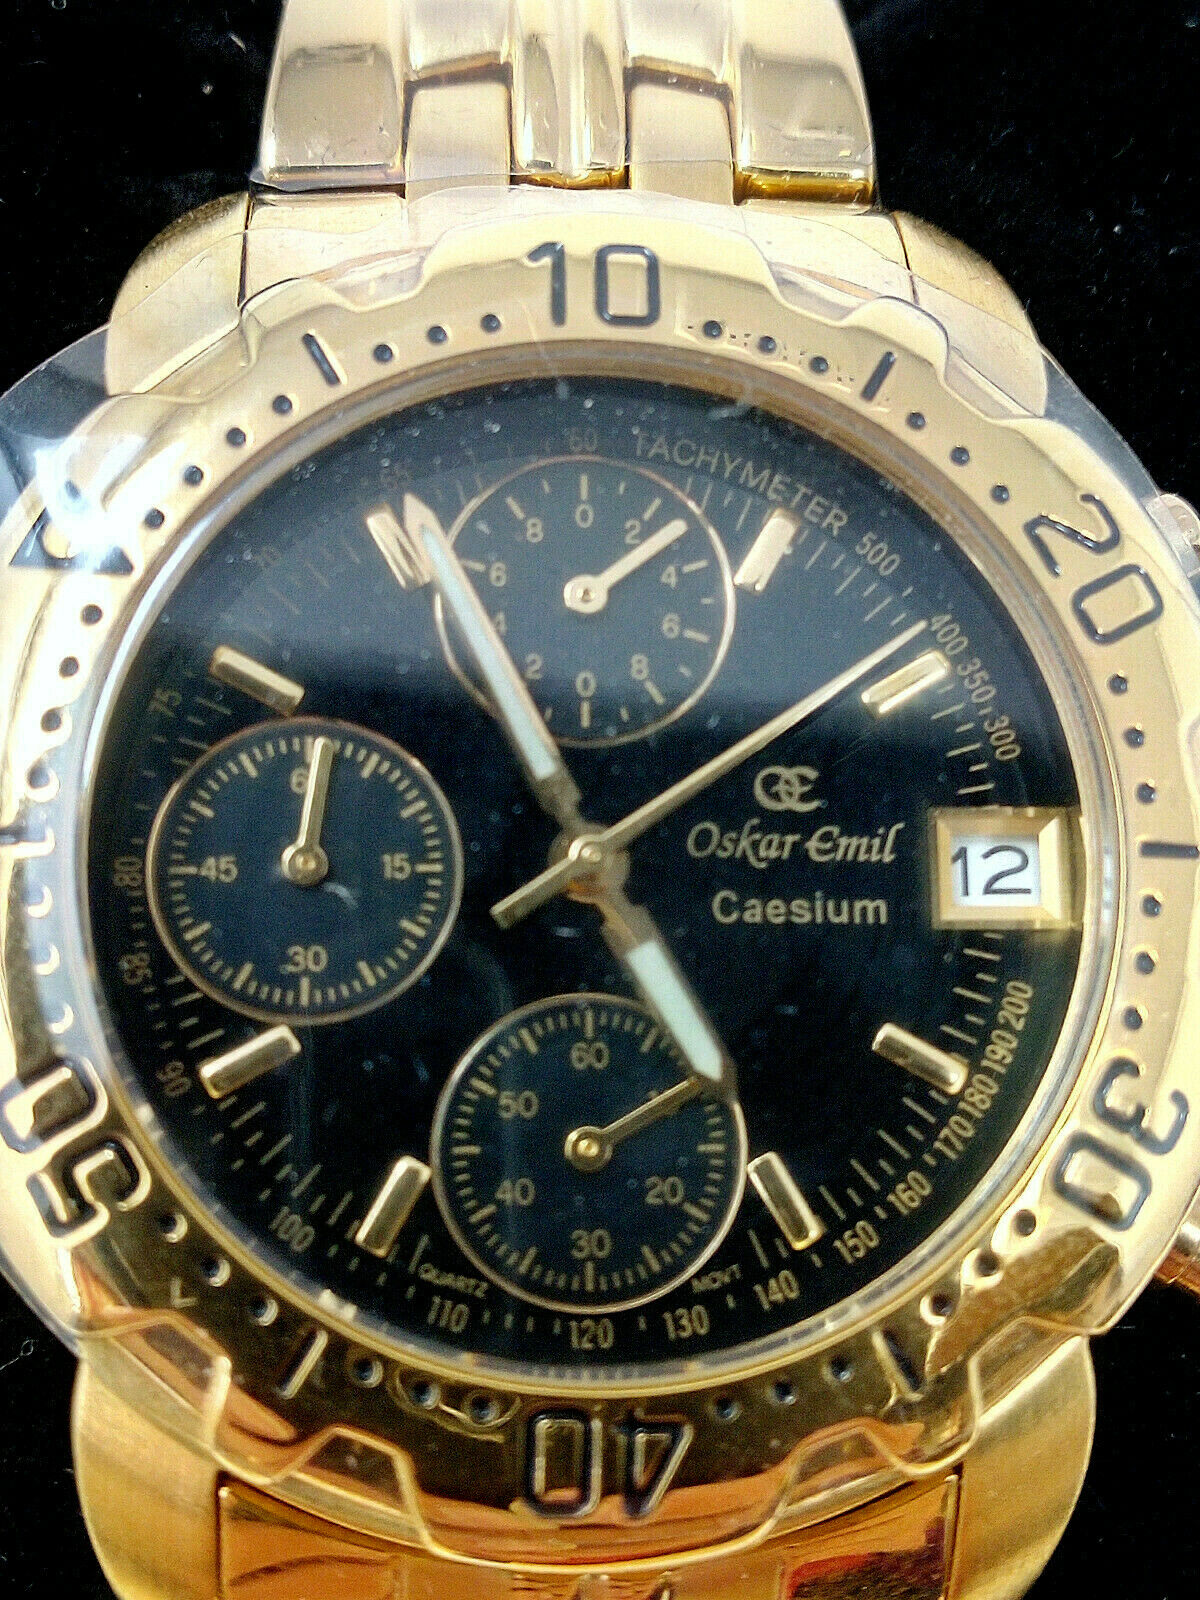 Oskar Emil caesium 119G chronograph watch in DY8 Dudley for £30.00 for sale  | Shpock